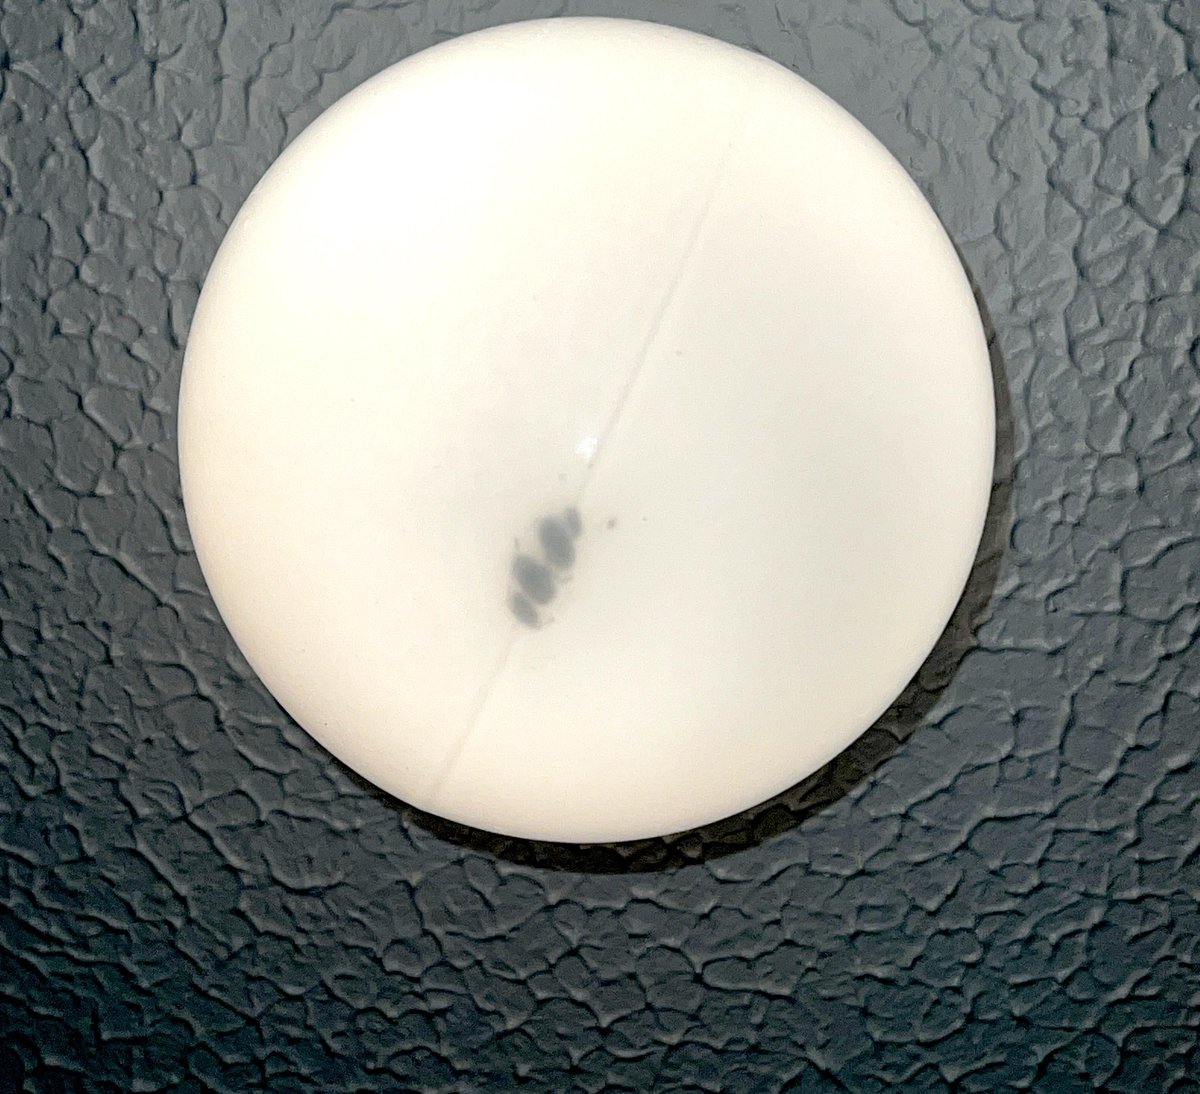 family of 4 dead woodlice and their shit inside my bathroom light